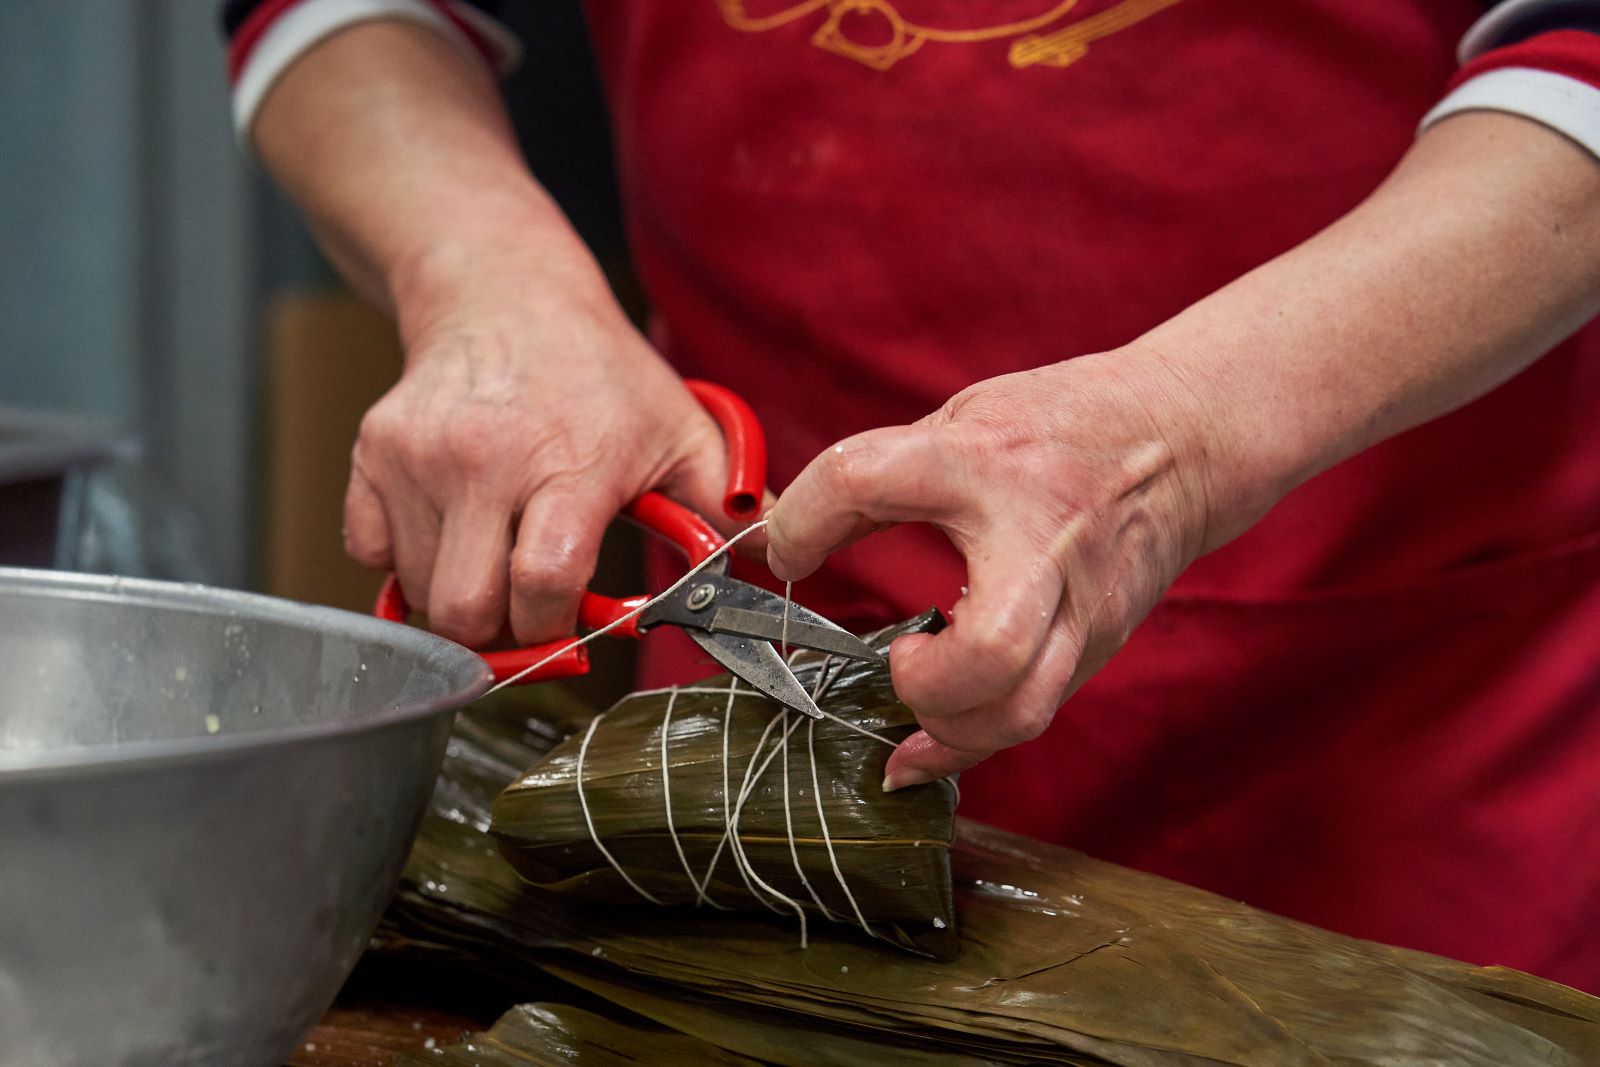 The hands of Xiao-Hong Wu trim butcher’s twine around a zongzi with a pair of red kitchen scissors. Wu is wearing a red apron and is cutting the zongzi at a counter on which a metal mixing bowl sits in the foreground. Only Wu’s arms and apron are visible in this shot.